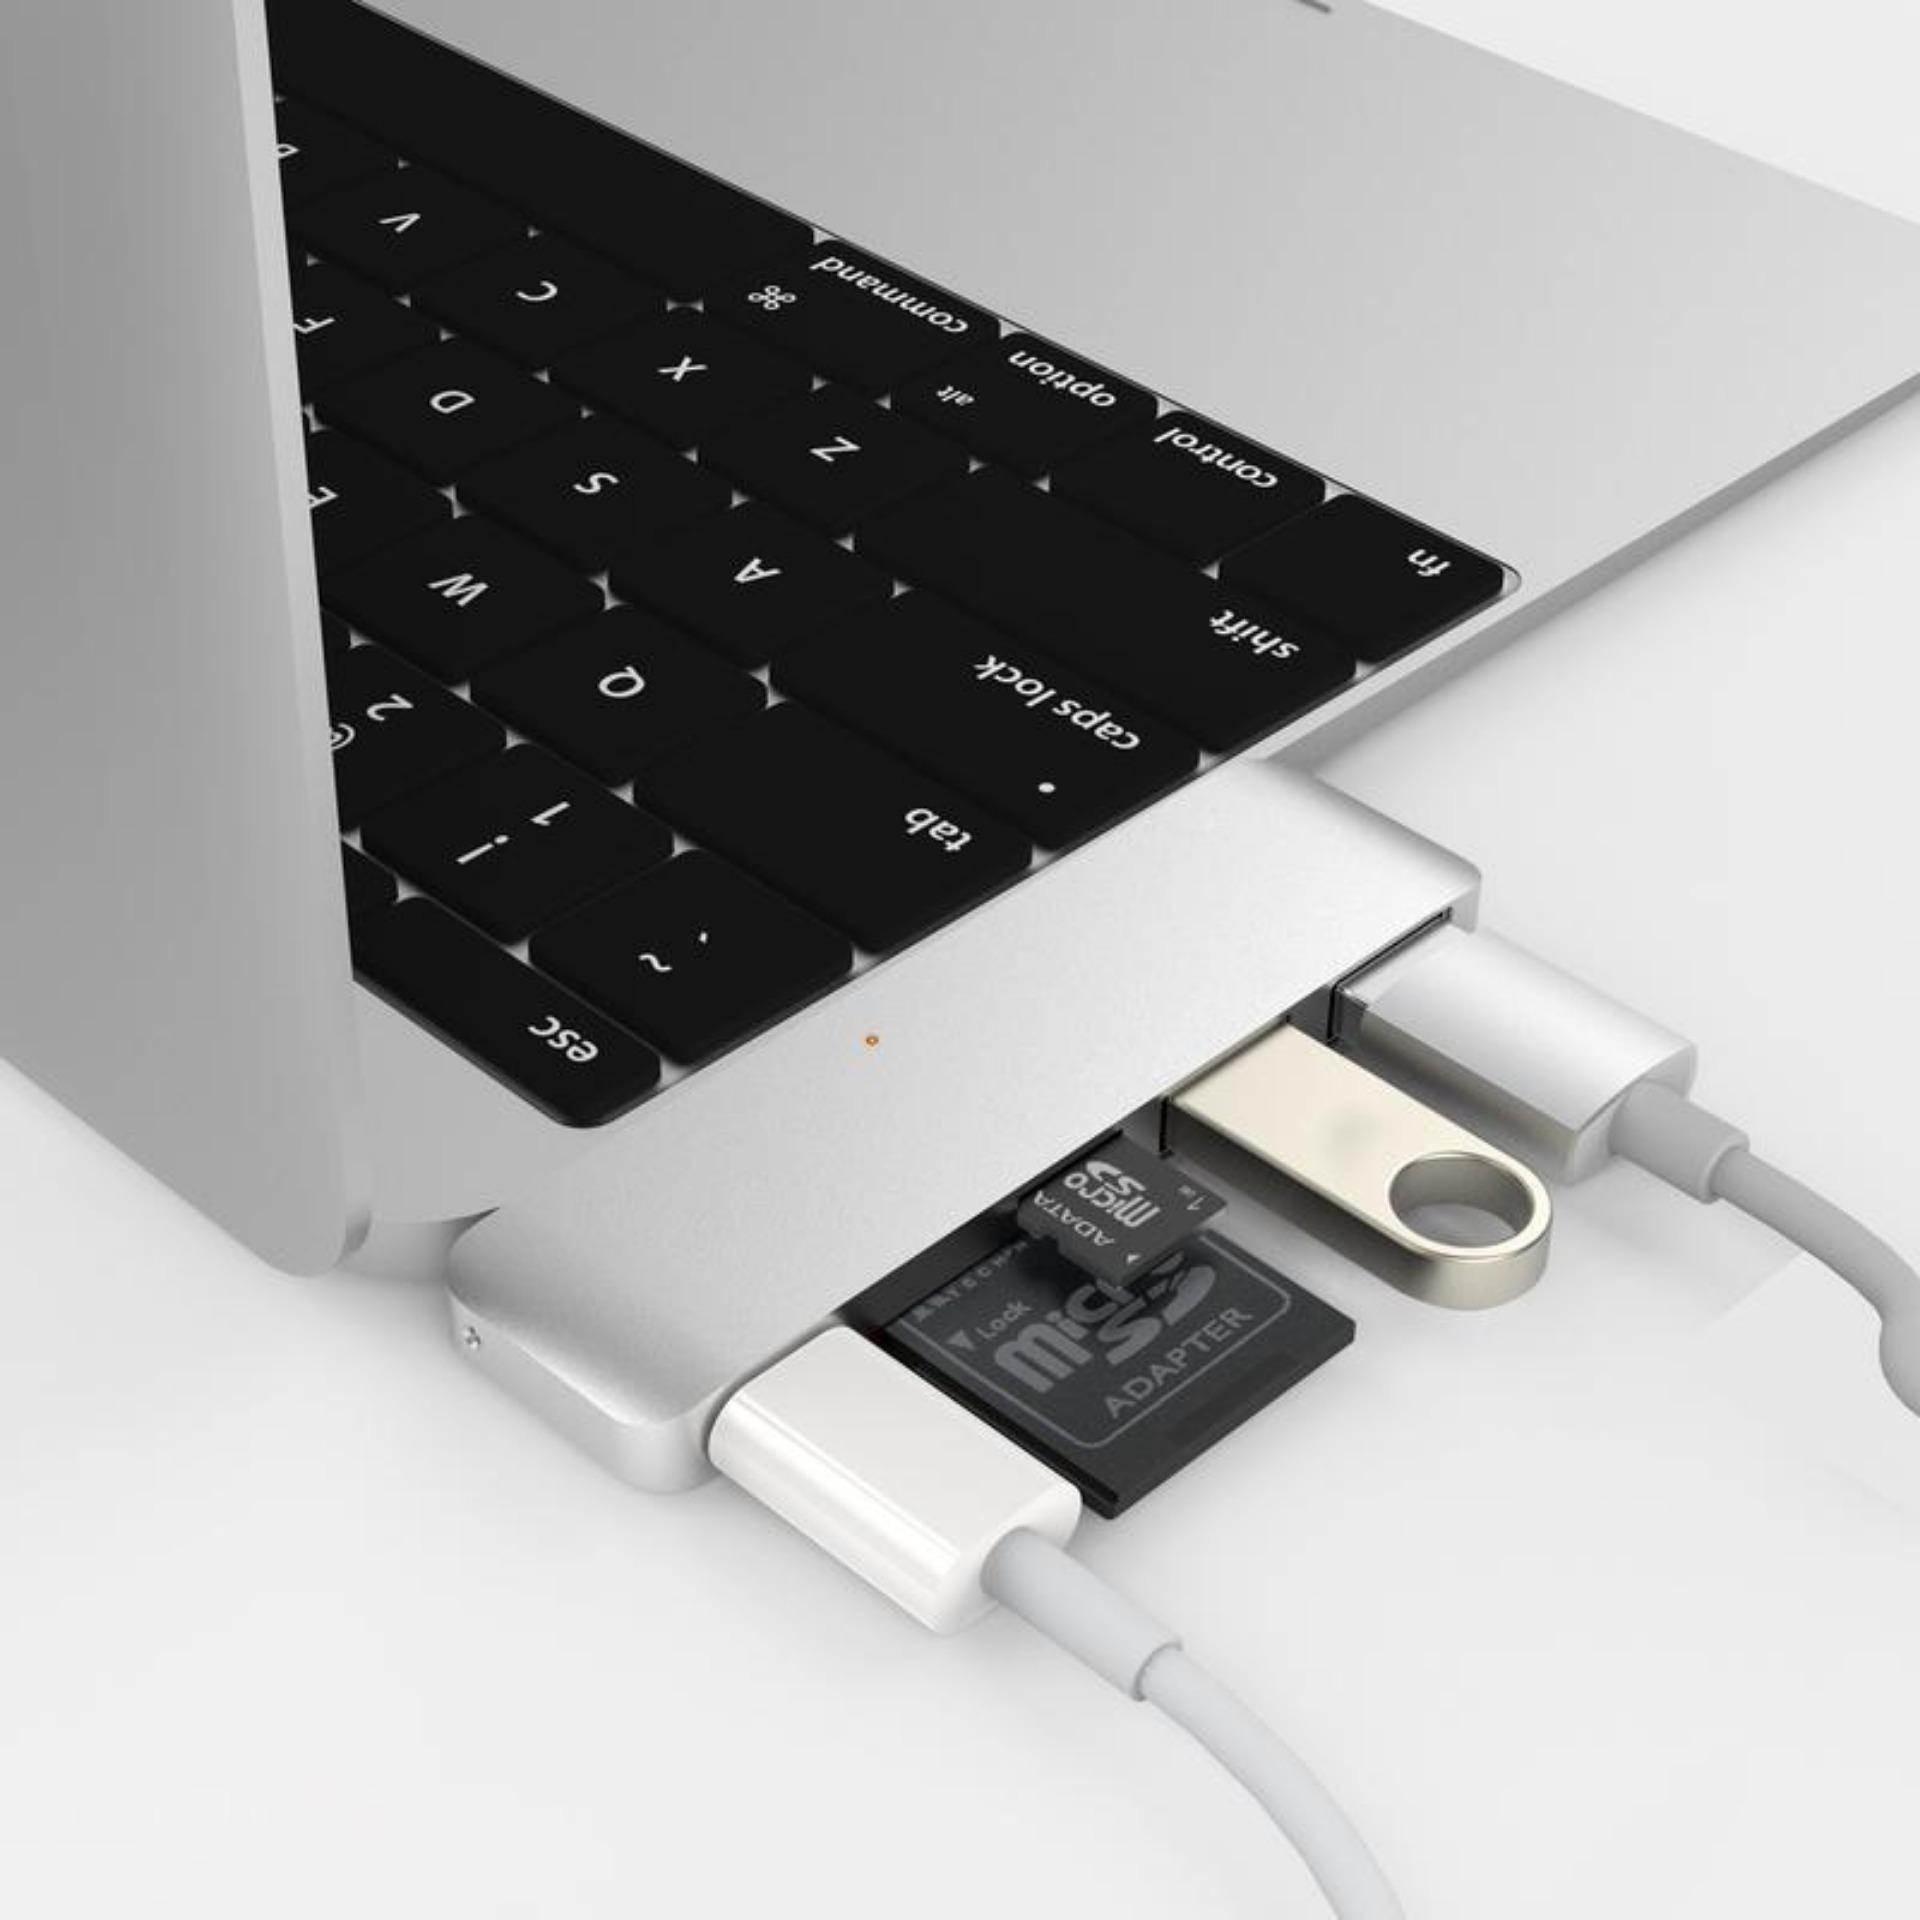 HyperDrive USB Type-C 5-in-1 Hub with Pass Through Charging - Silver